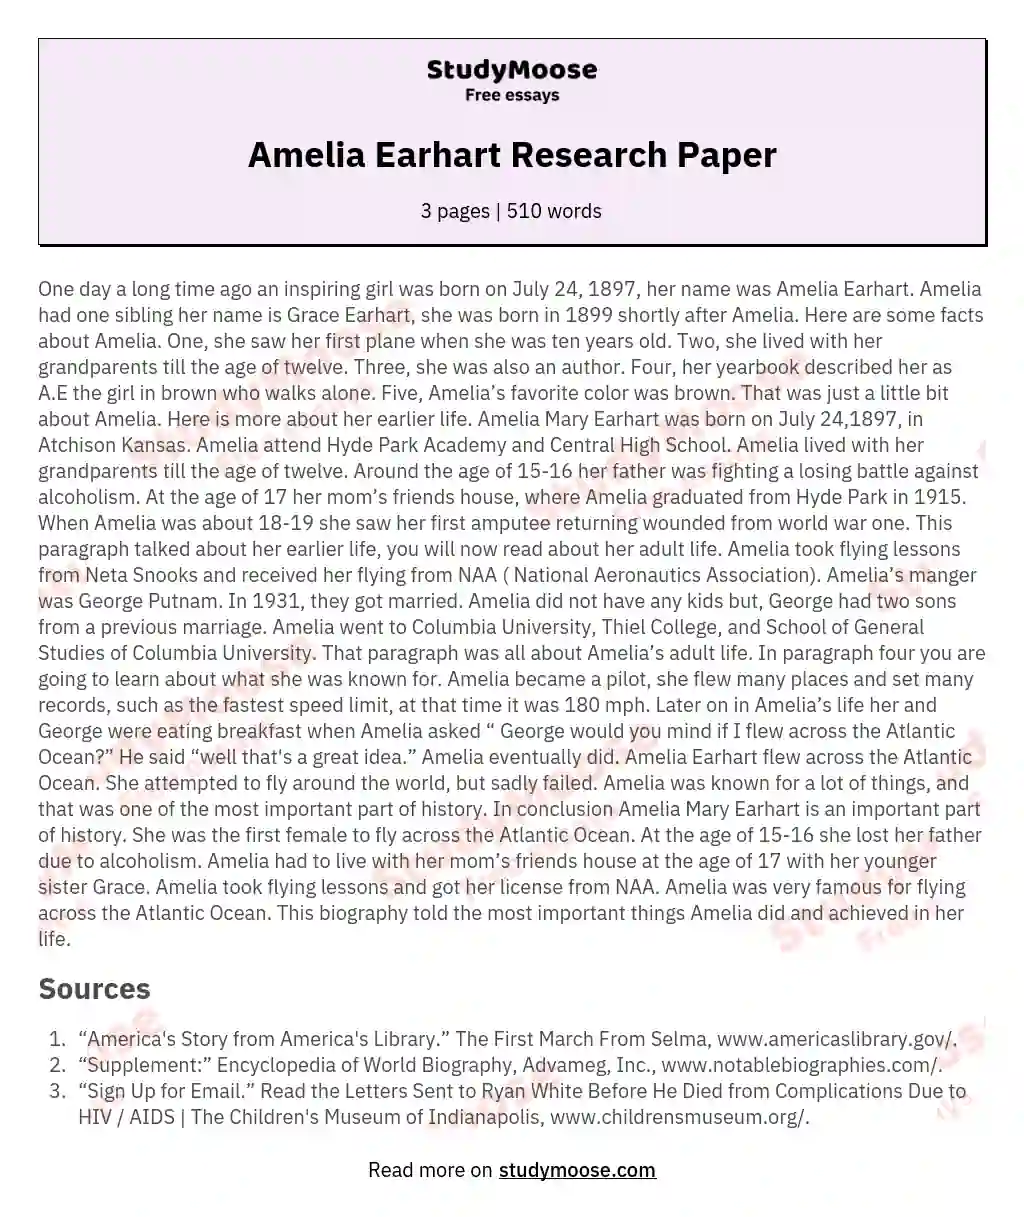 Amelia Earhart Research Paper essay